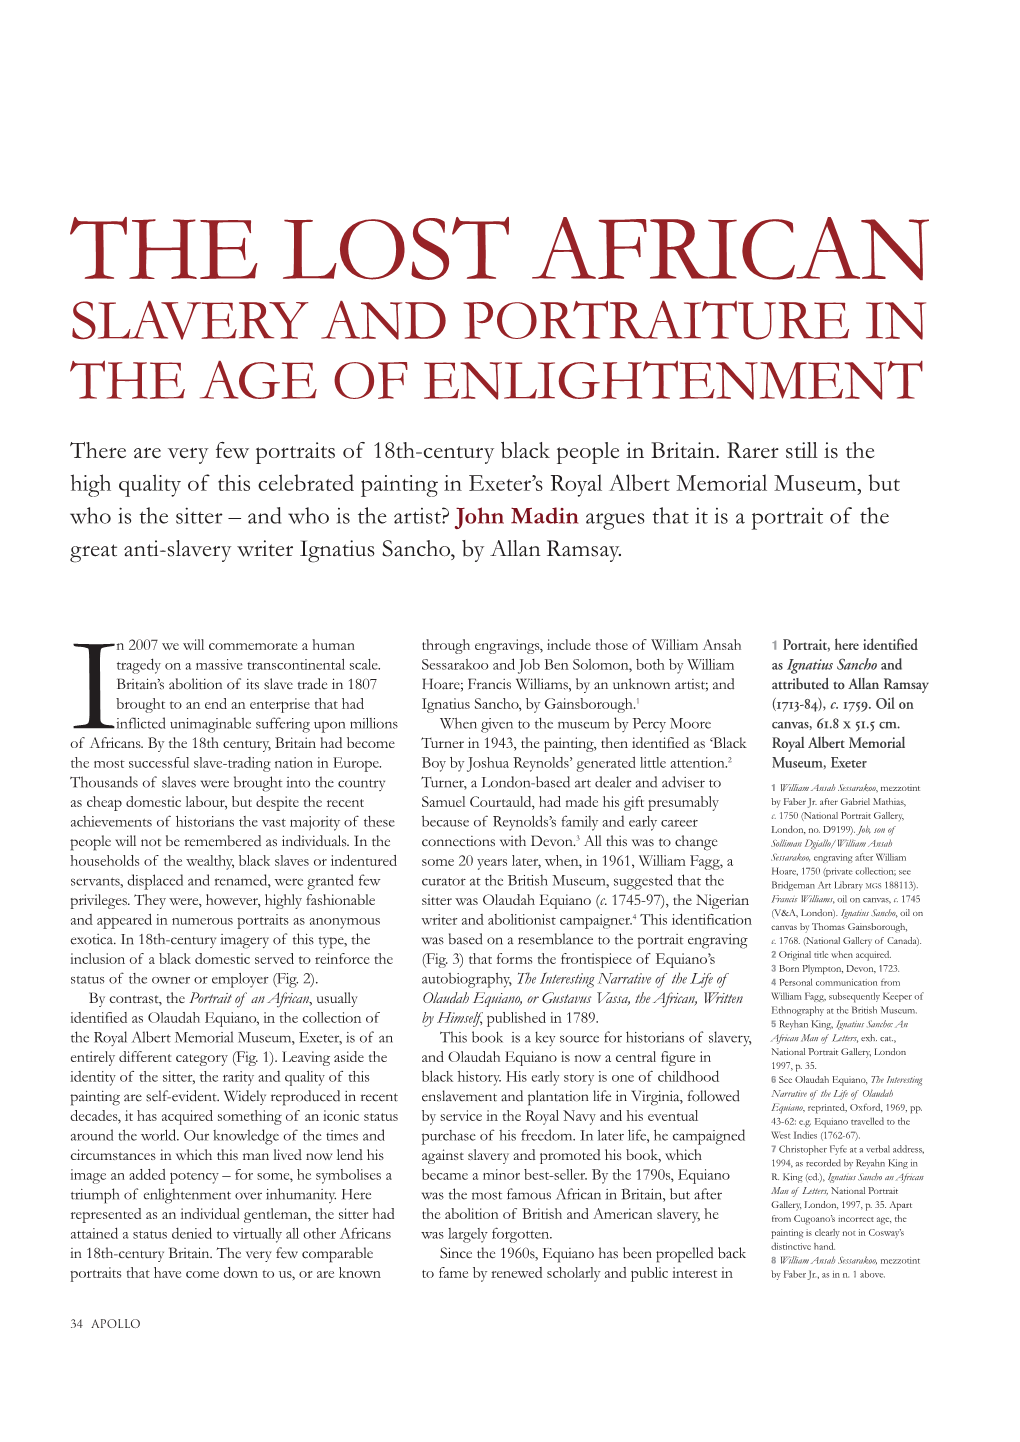 The Lost African Slavery and Portraiture in the Age of Enlightenment